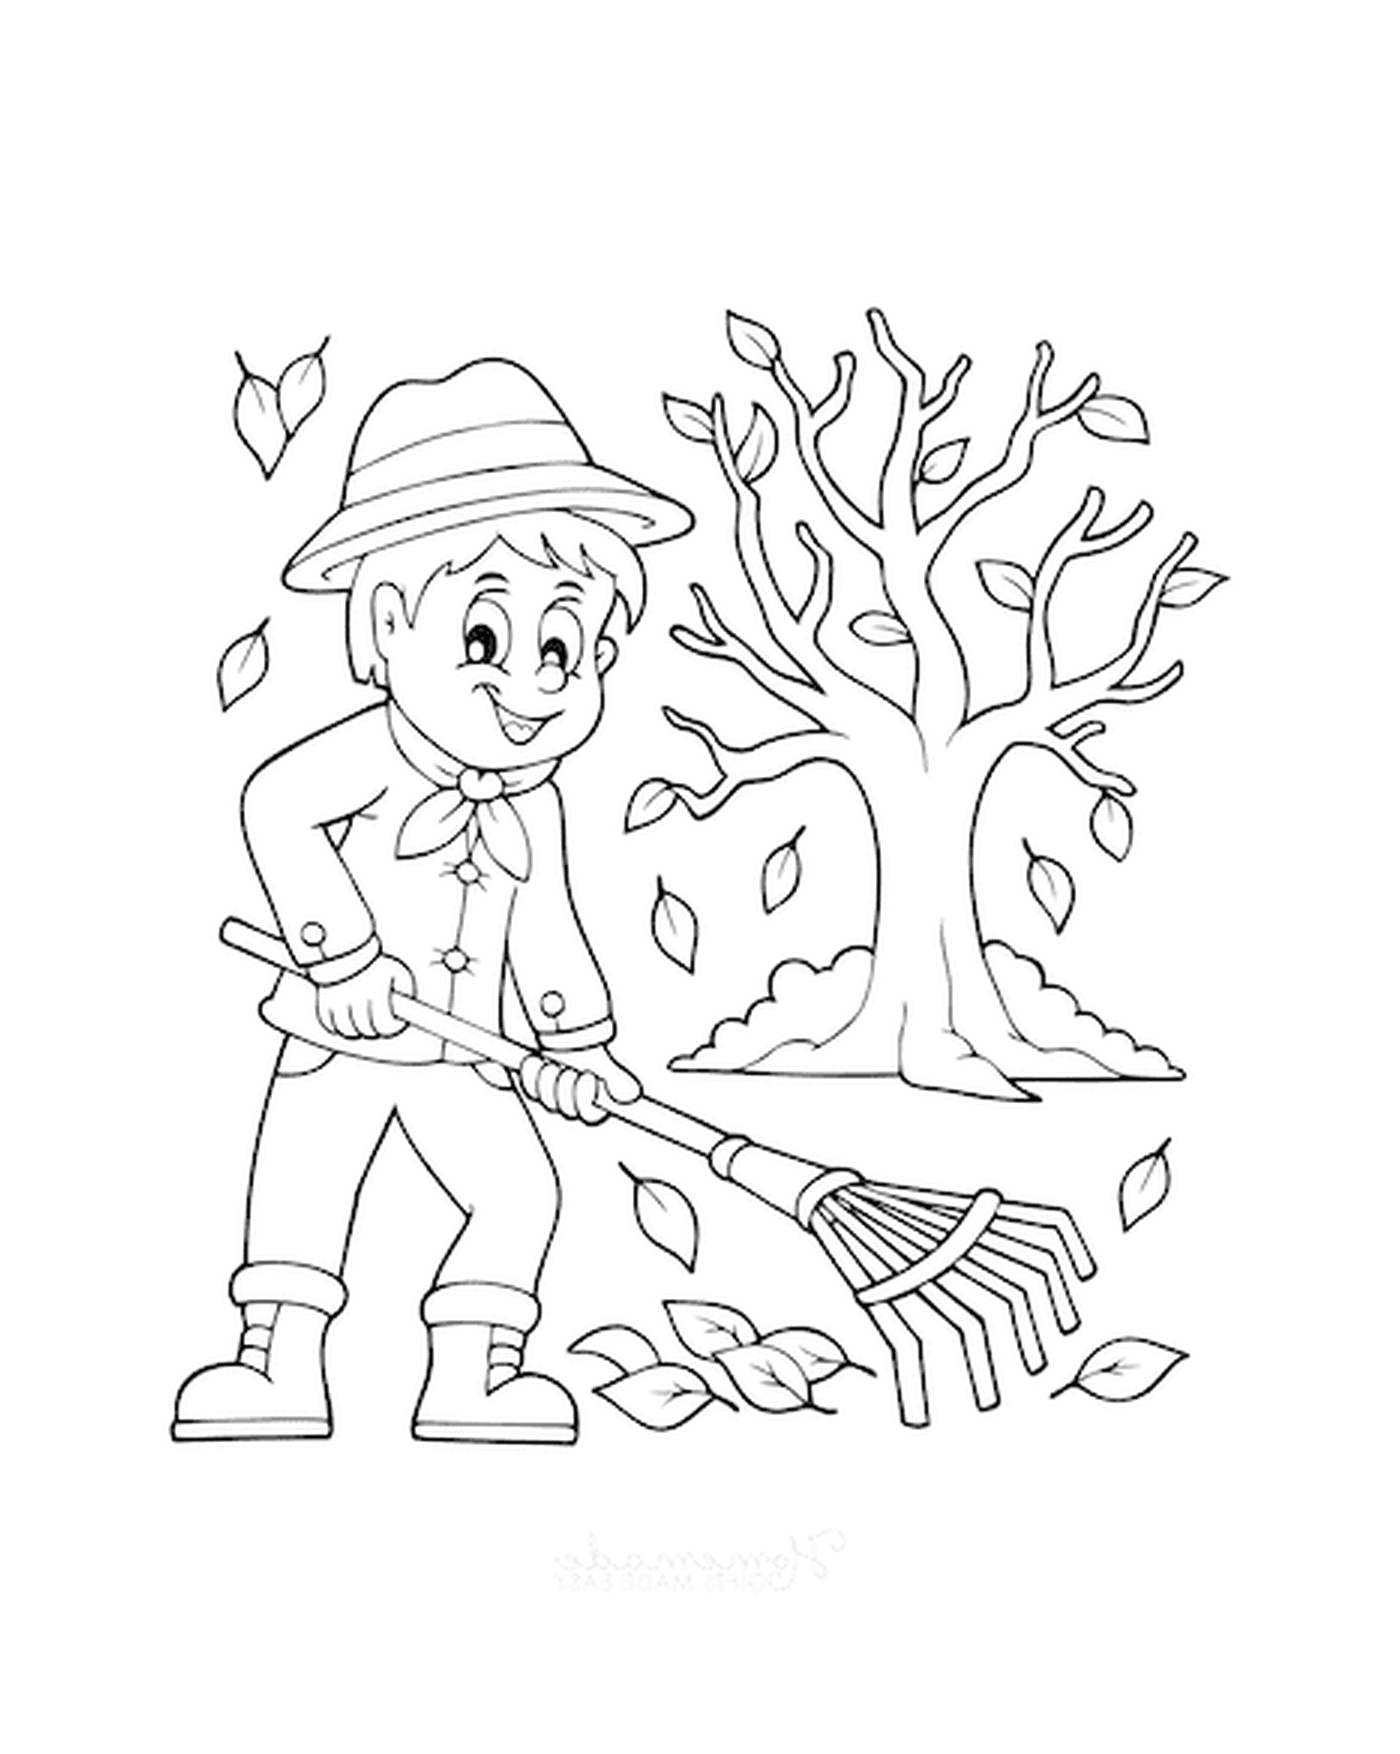  A boy rattling the leaves in front of a tree 